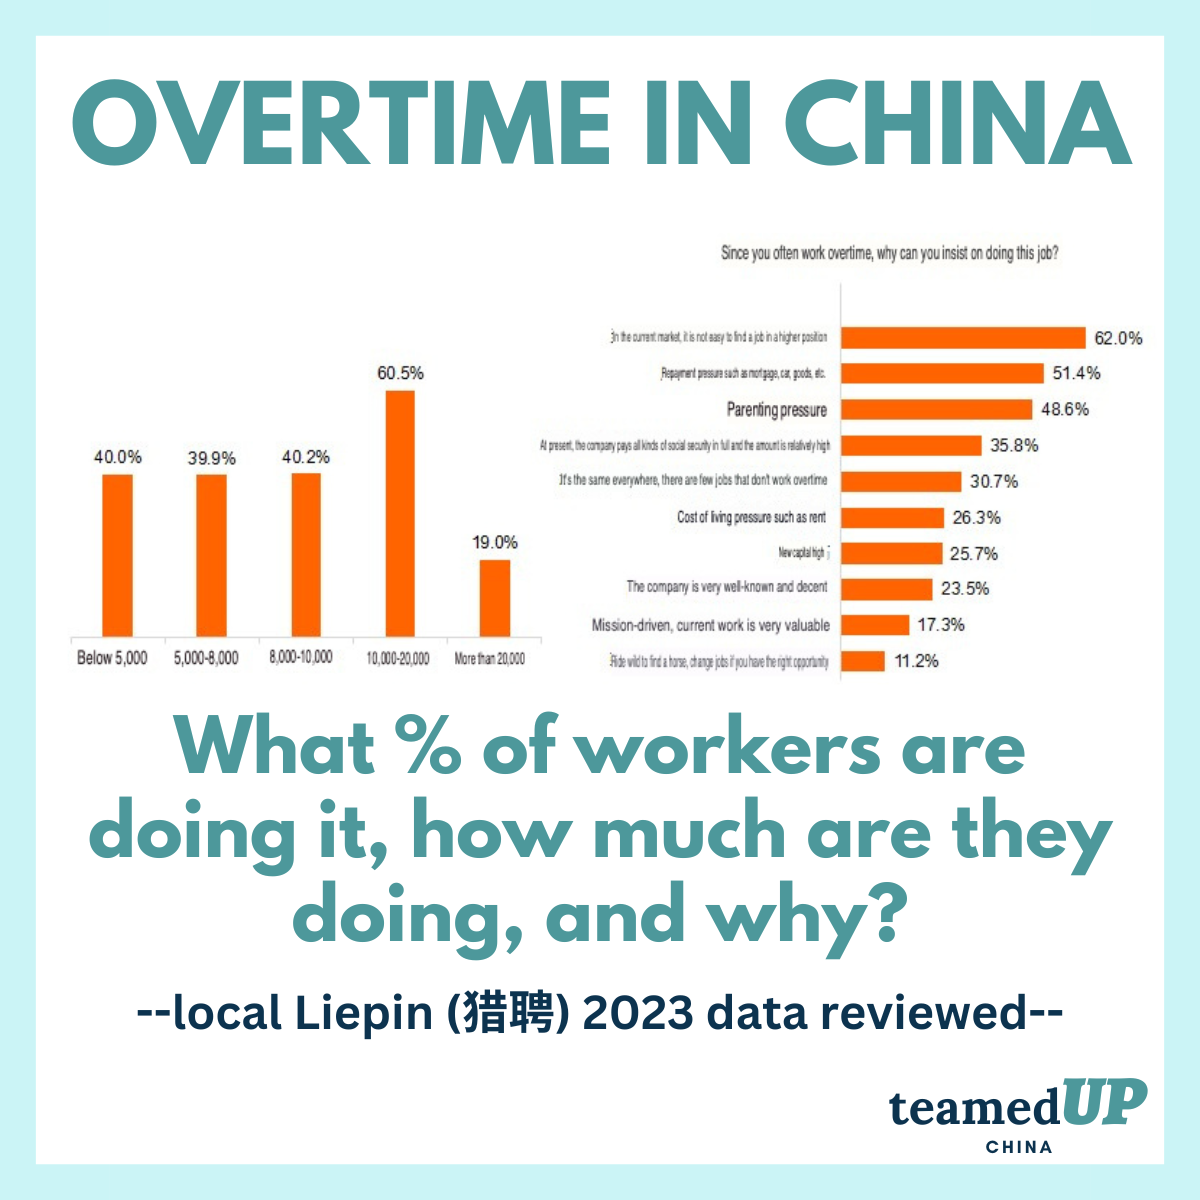 Overtime in China